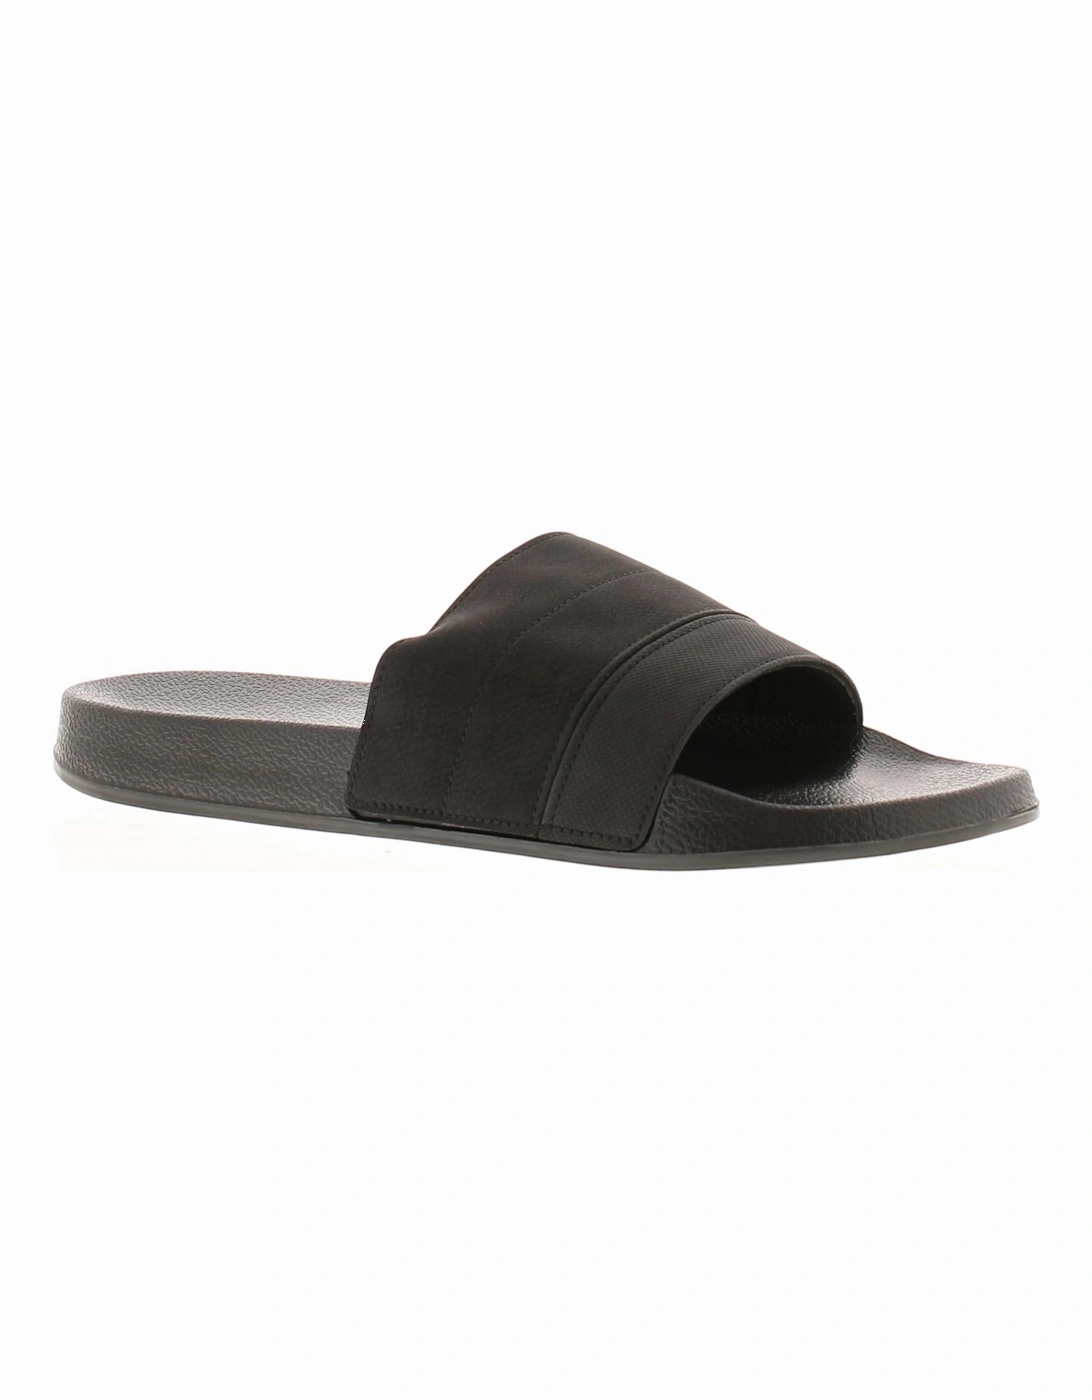 Mens Beach Sandals Muse black UK Size, 6 of 5